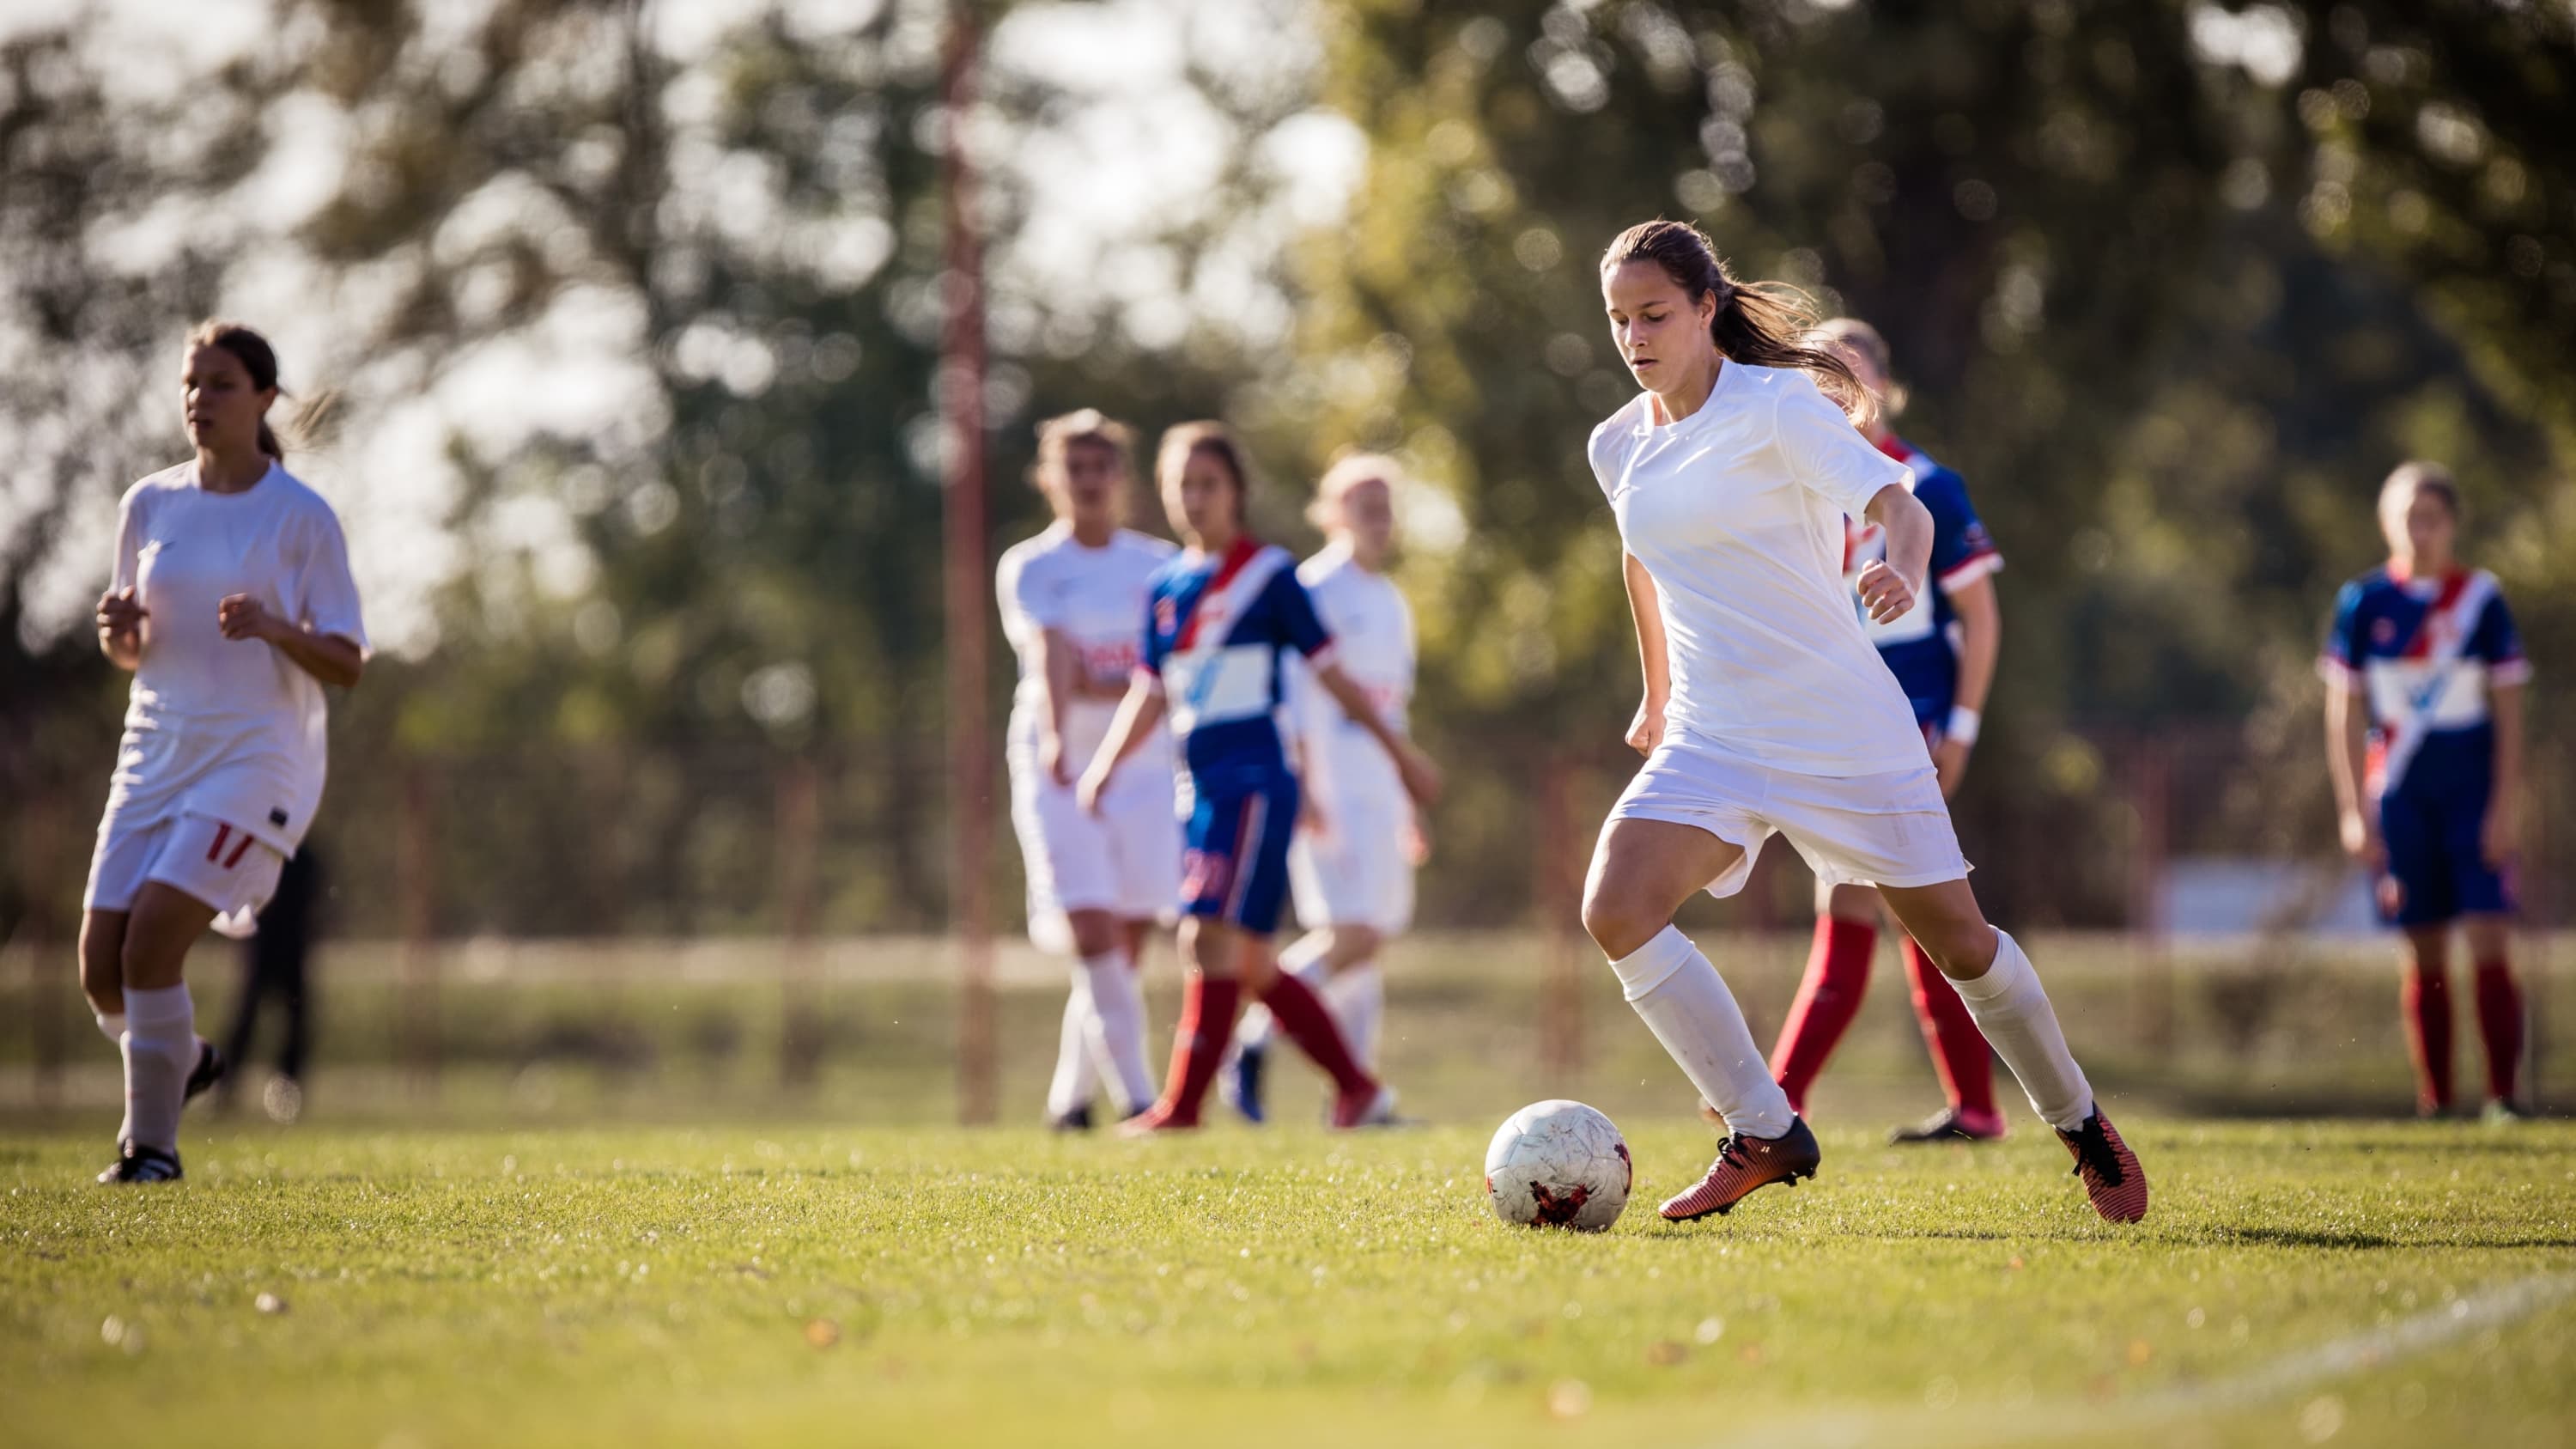 female soccer player, dribbling soccer ball, possibly before an injury to articular cartilagge